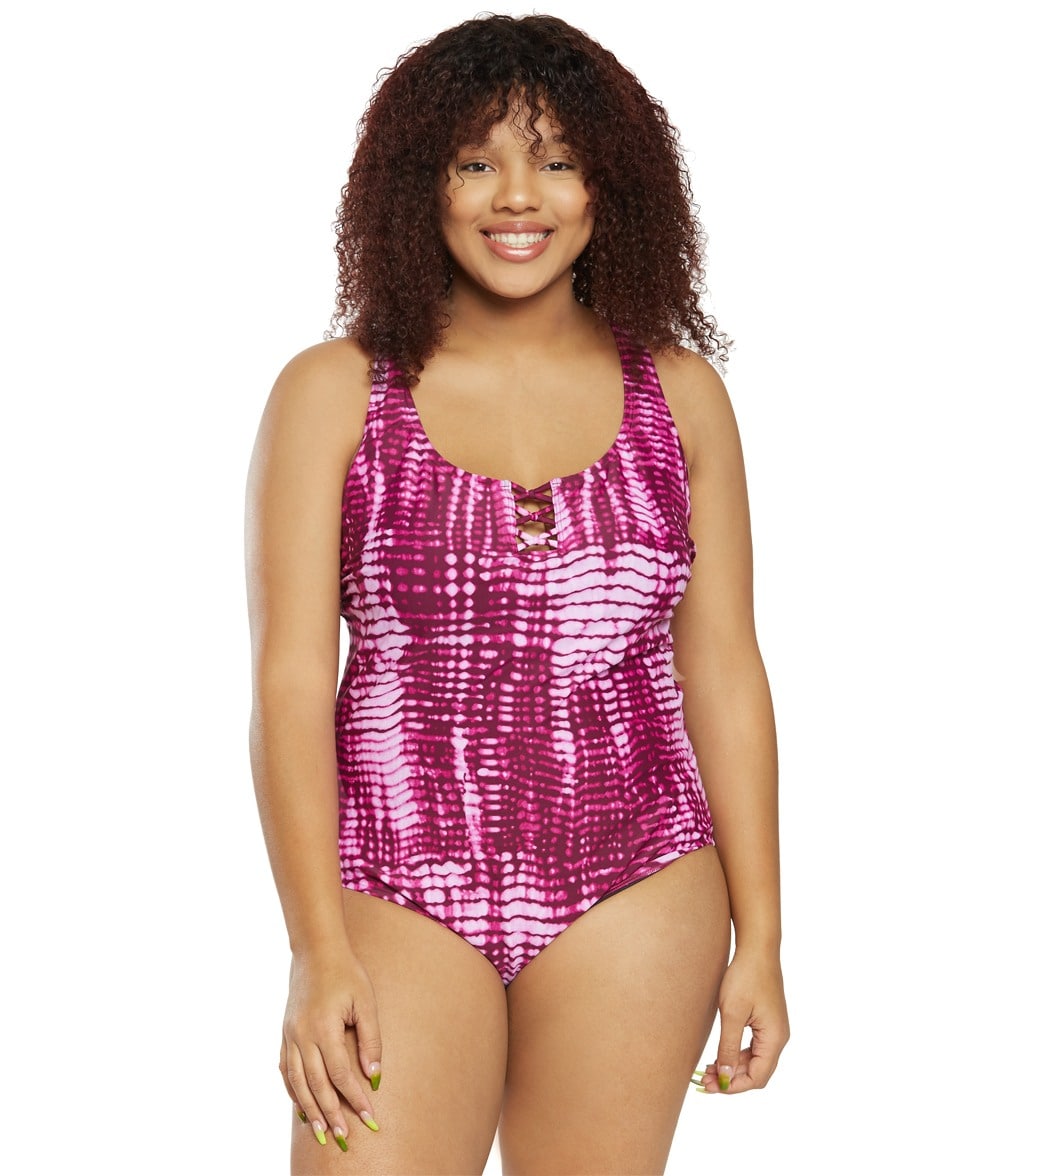 Speedo Plus Size Active Knotted Crisscross Chlorine Resistant One Piece  Swimsuit at